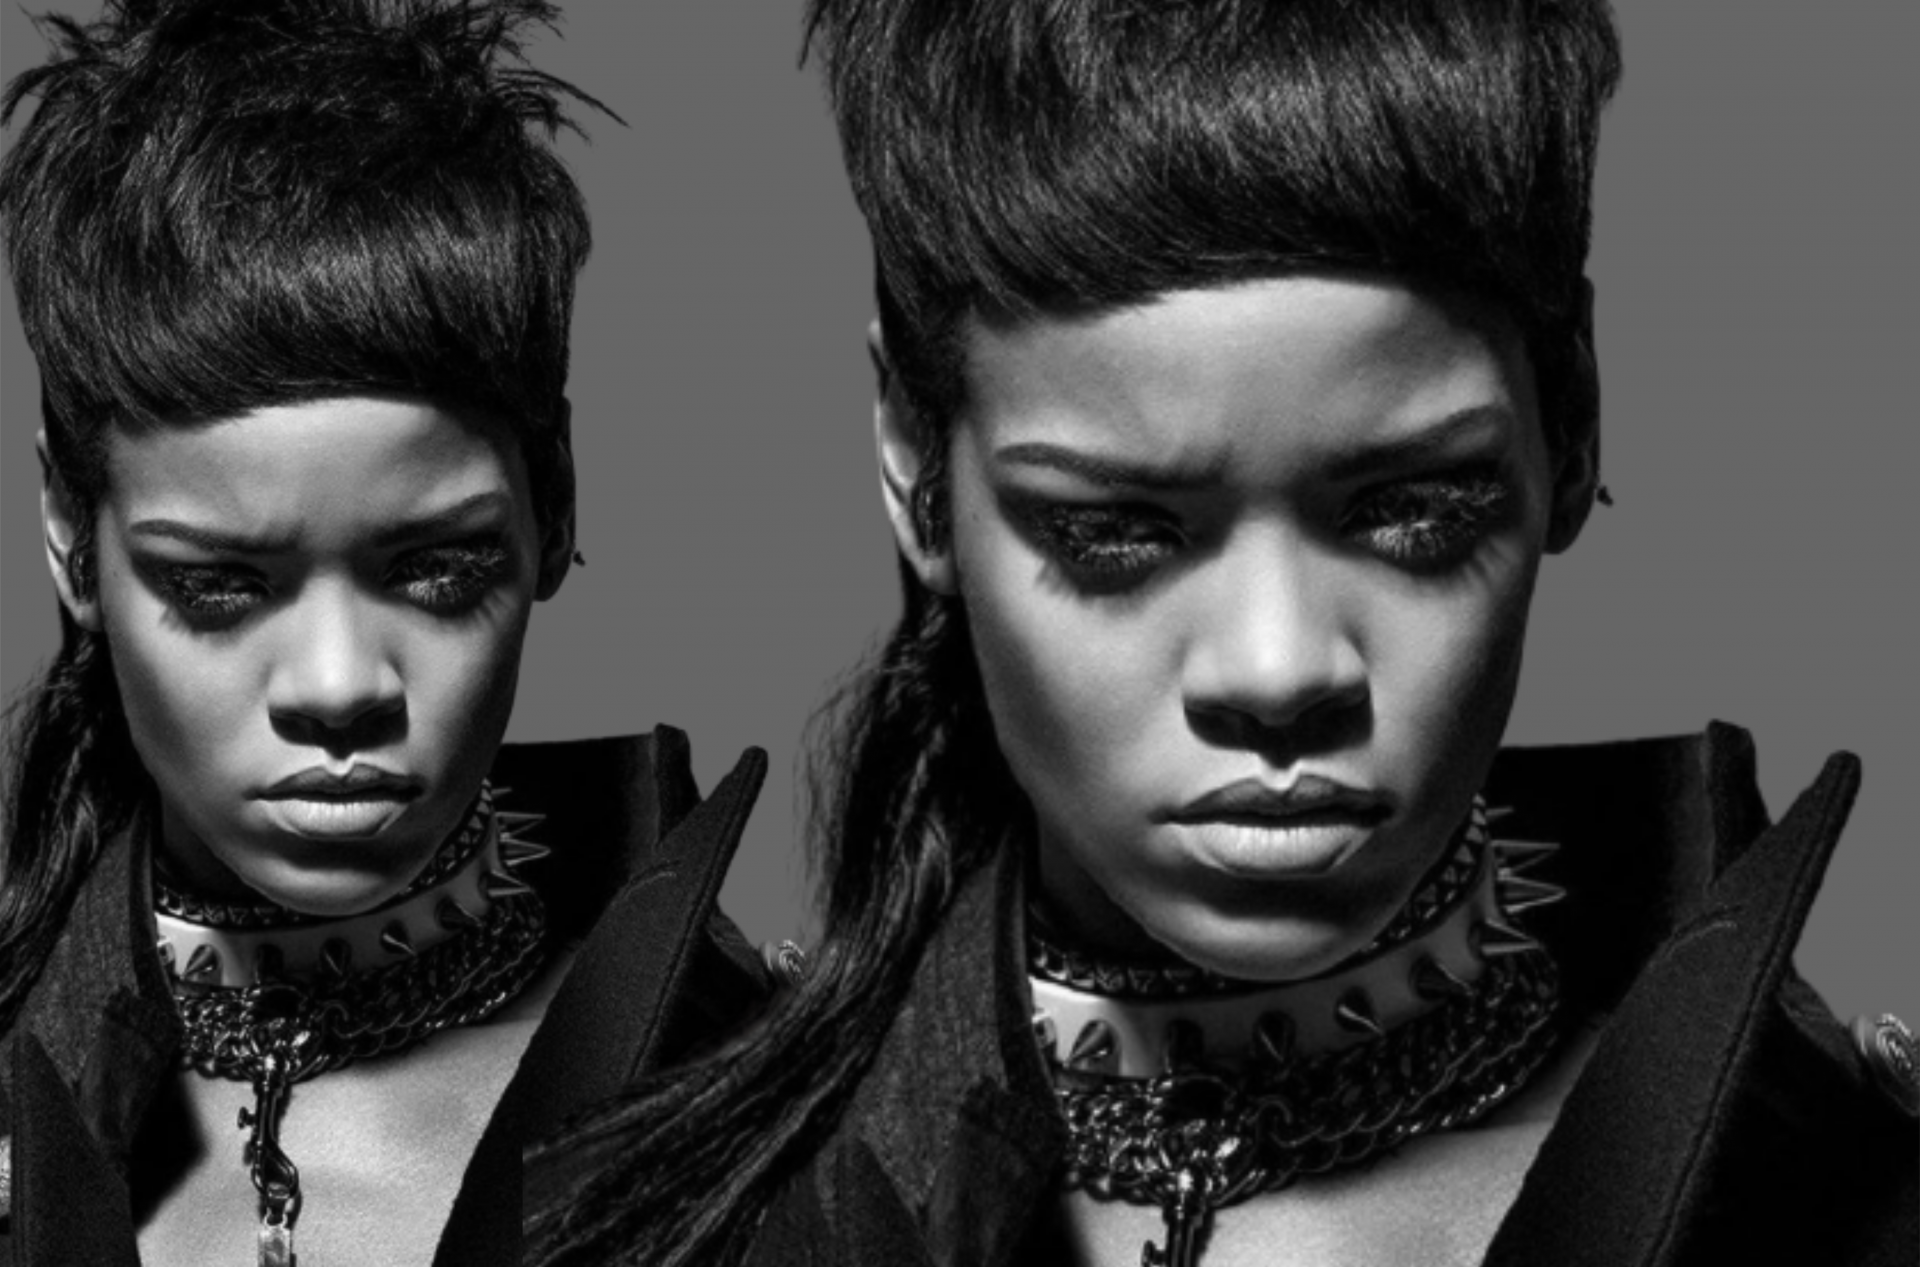 The Savage x Fenty Vol 2 Show Proves Mullets Are Cool Again